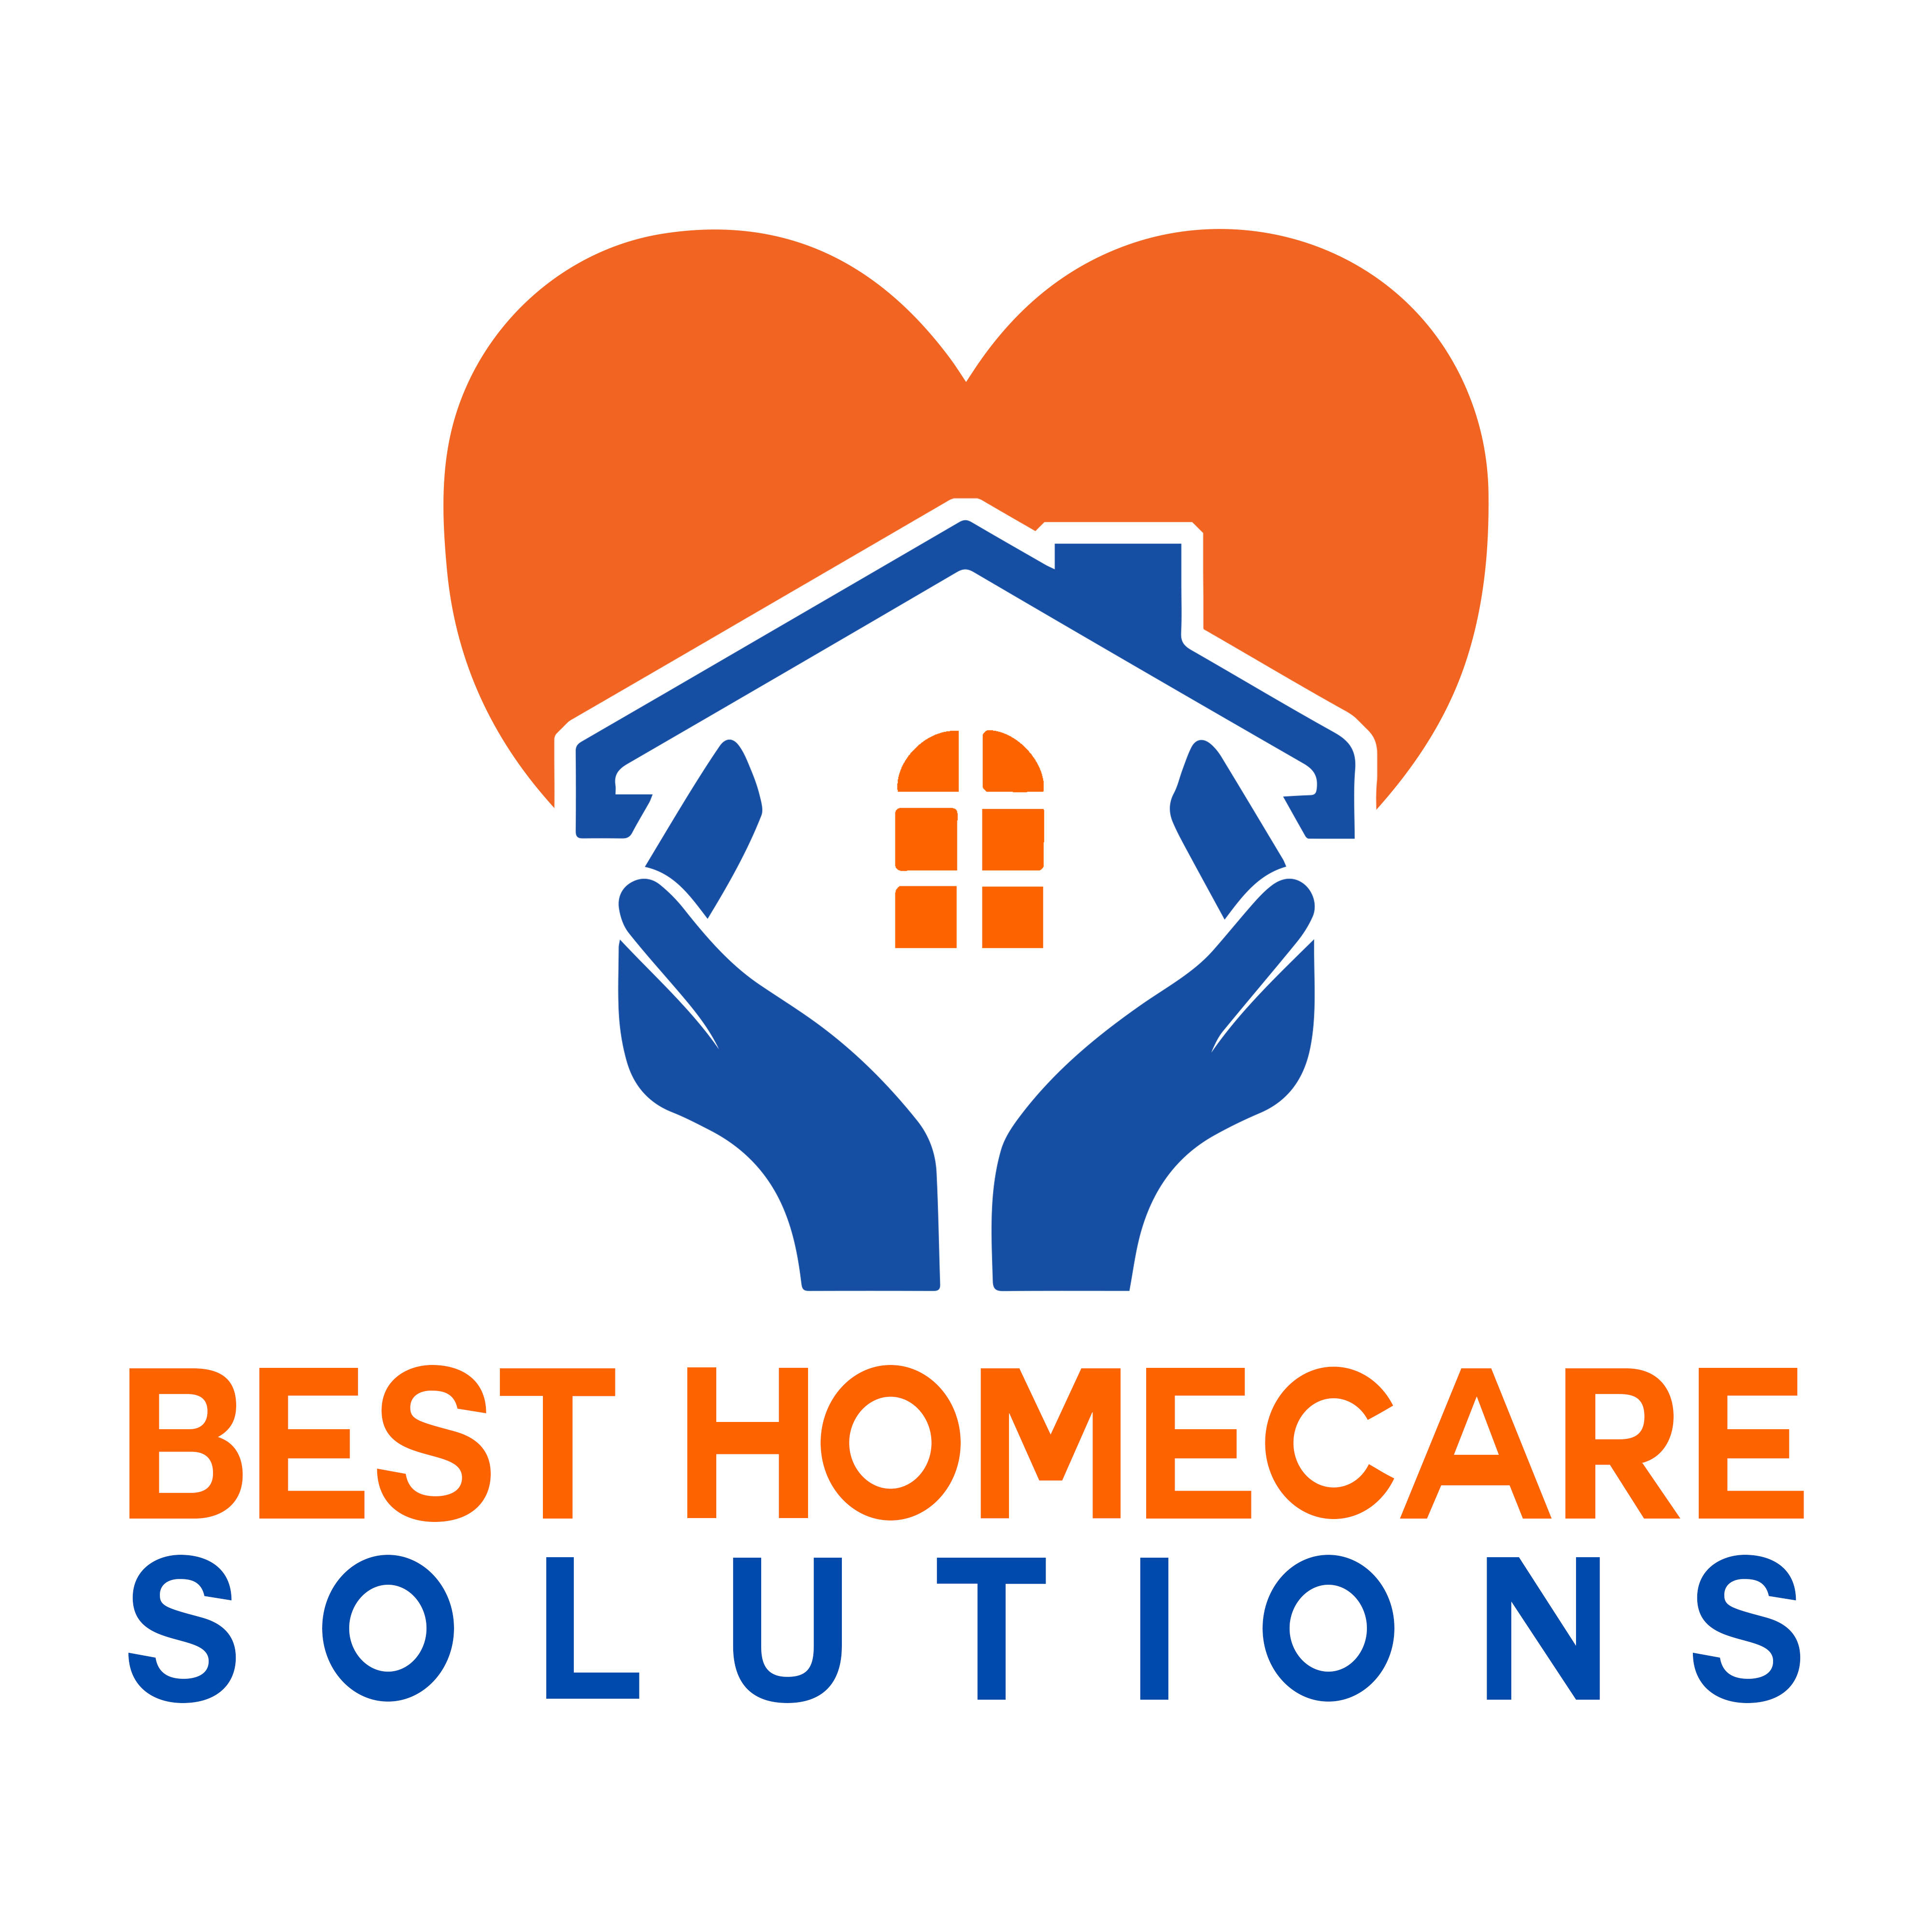 Best Homecare Solutions